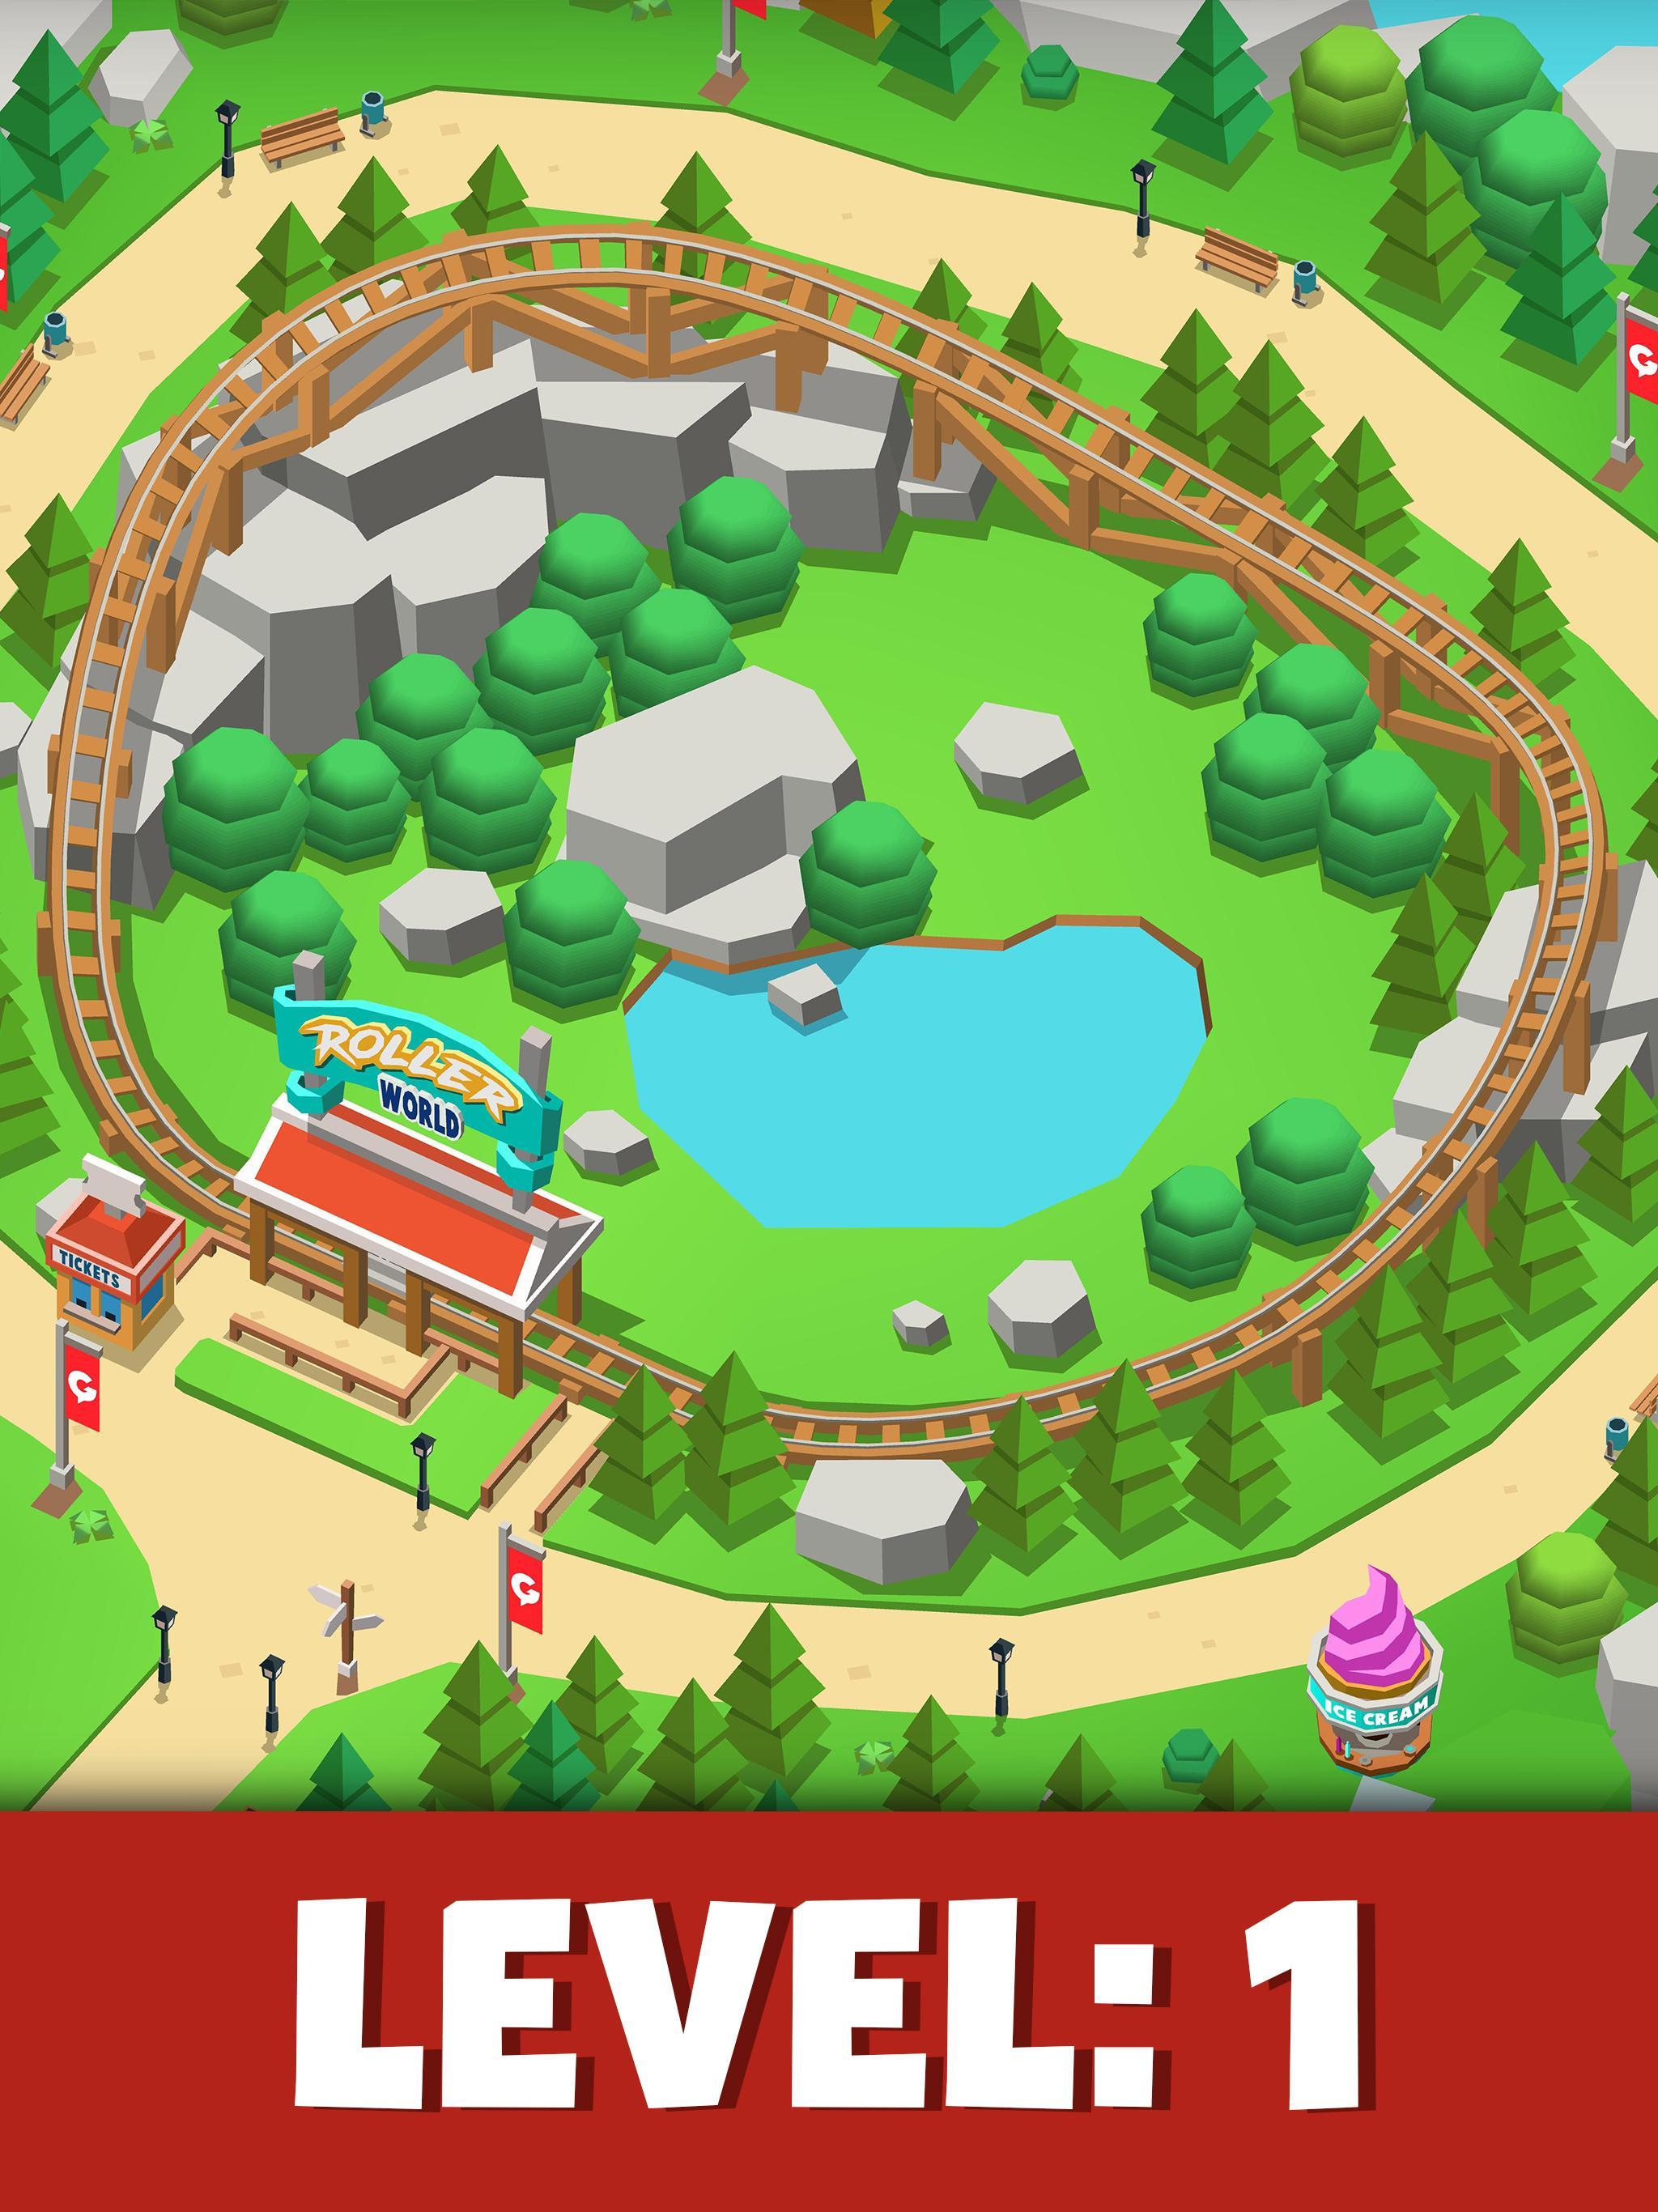 Idle Theme Park Tycoon Recreation Game For Android Apk Download - cheats for theme park tycoon 2 roblox